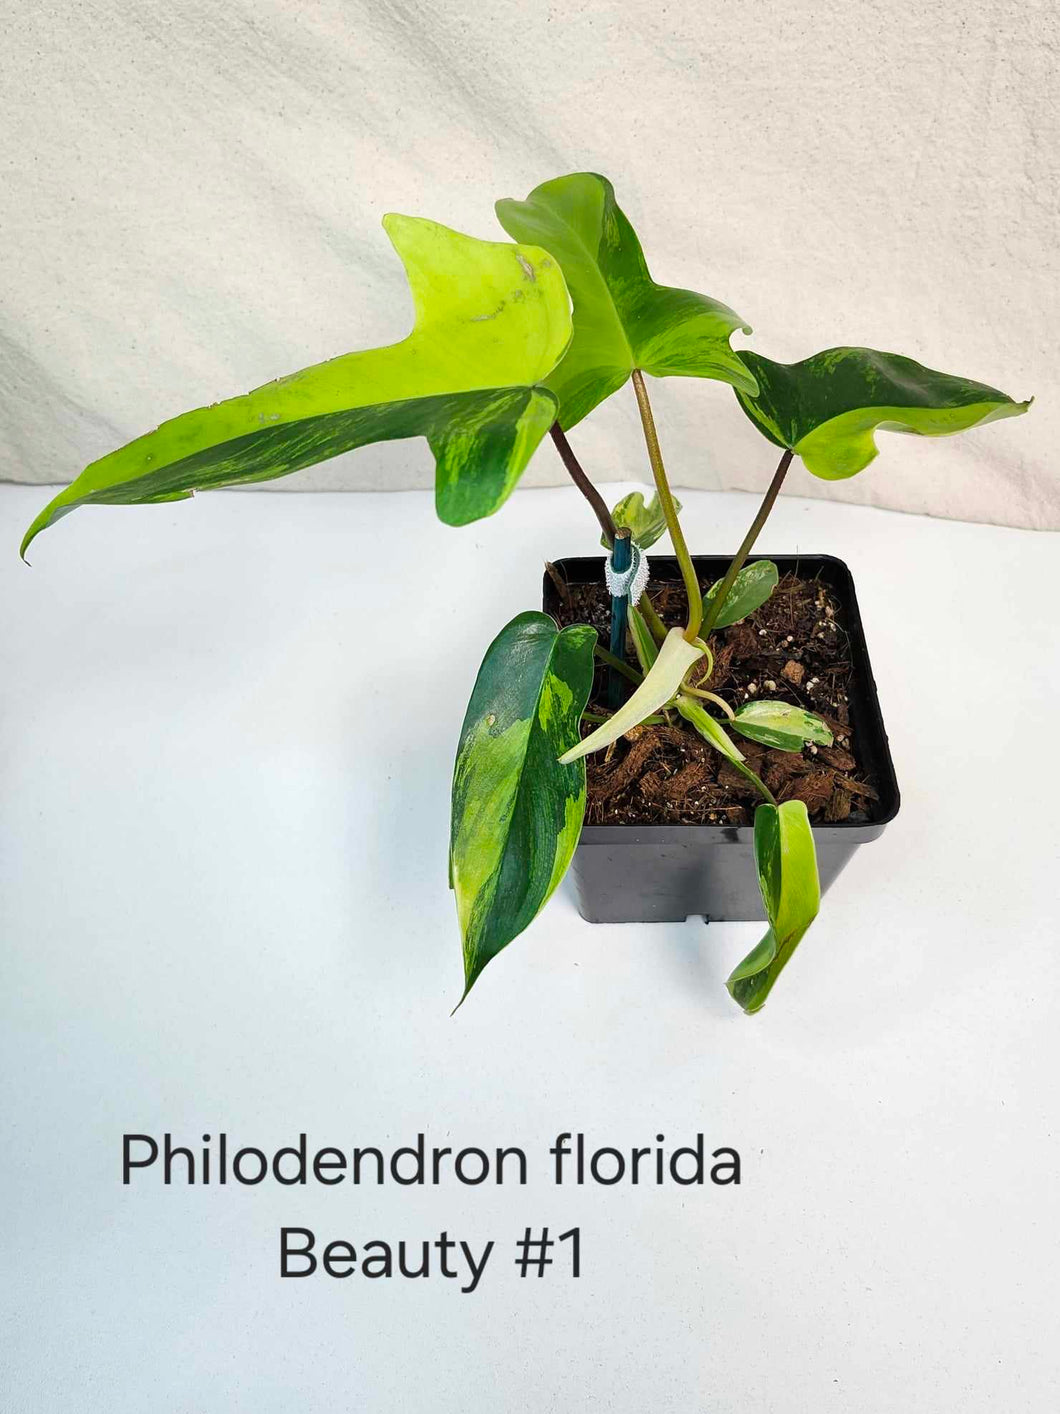 Philodendron florida beauty #1